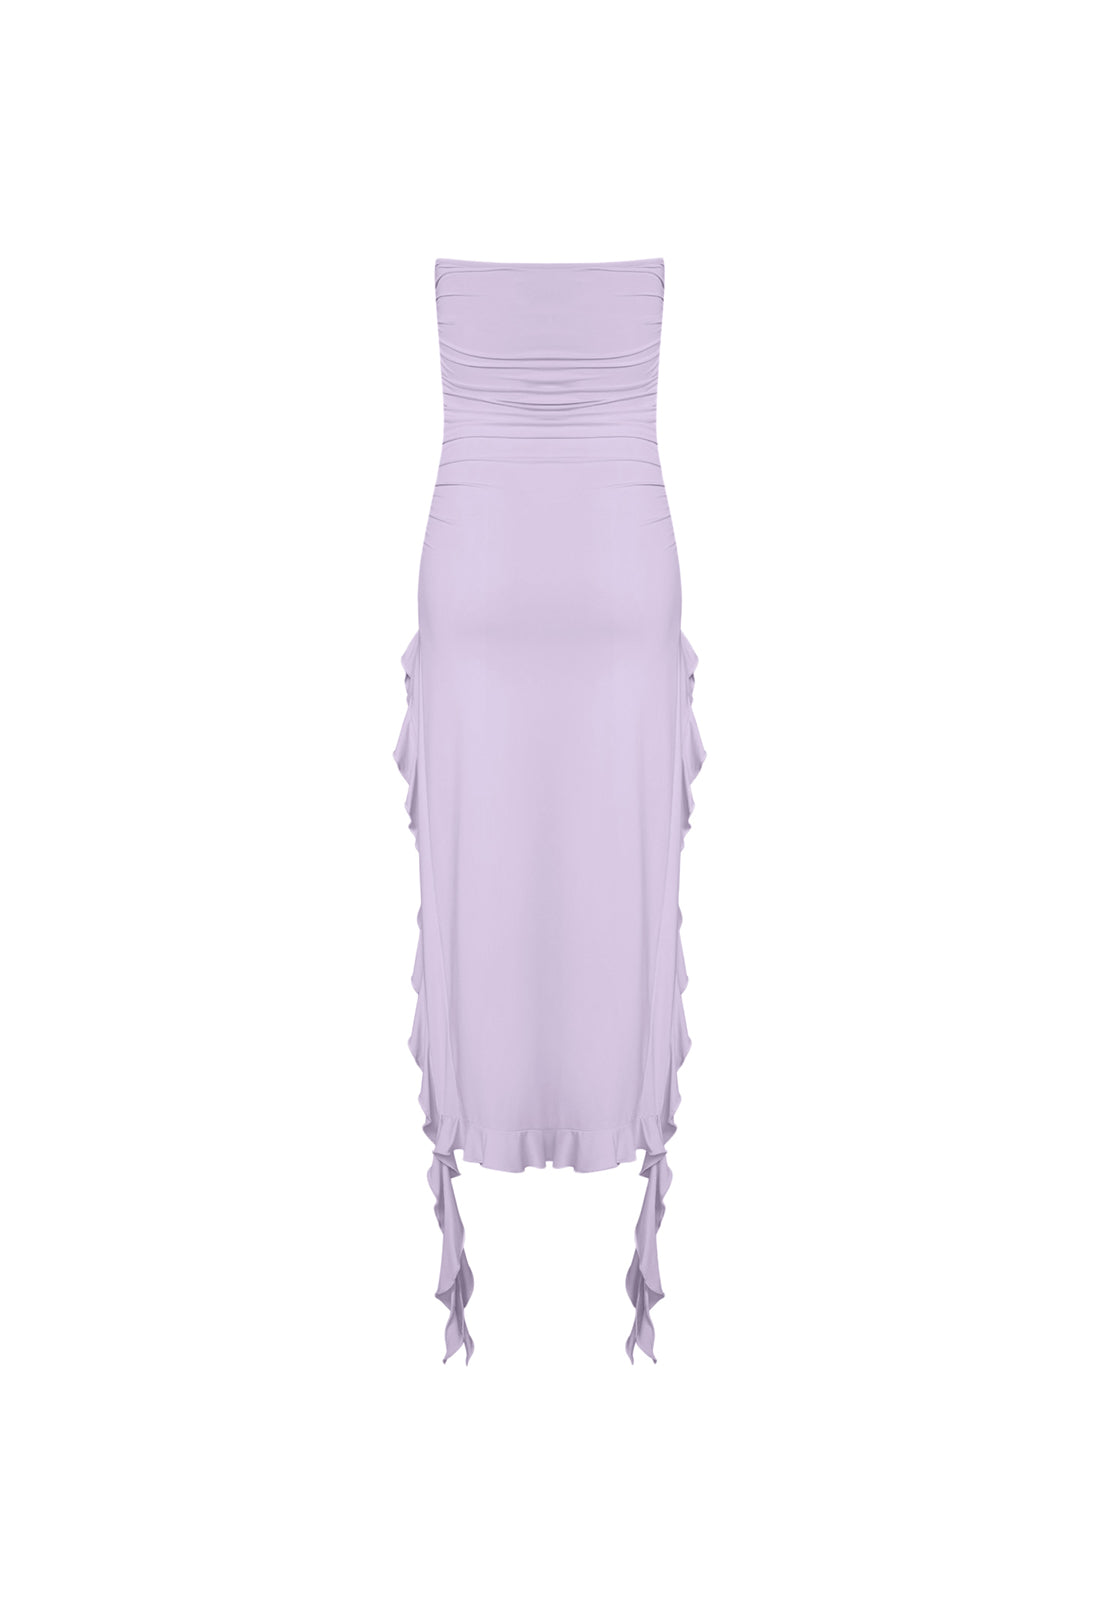 RENDEZVOUS STRAPLESS DRESS - LILAC